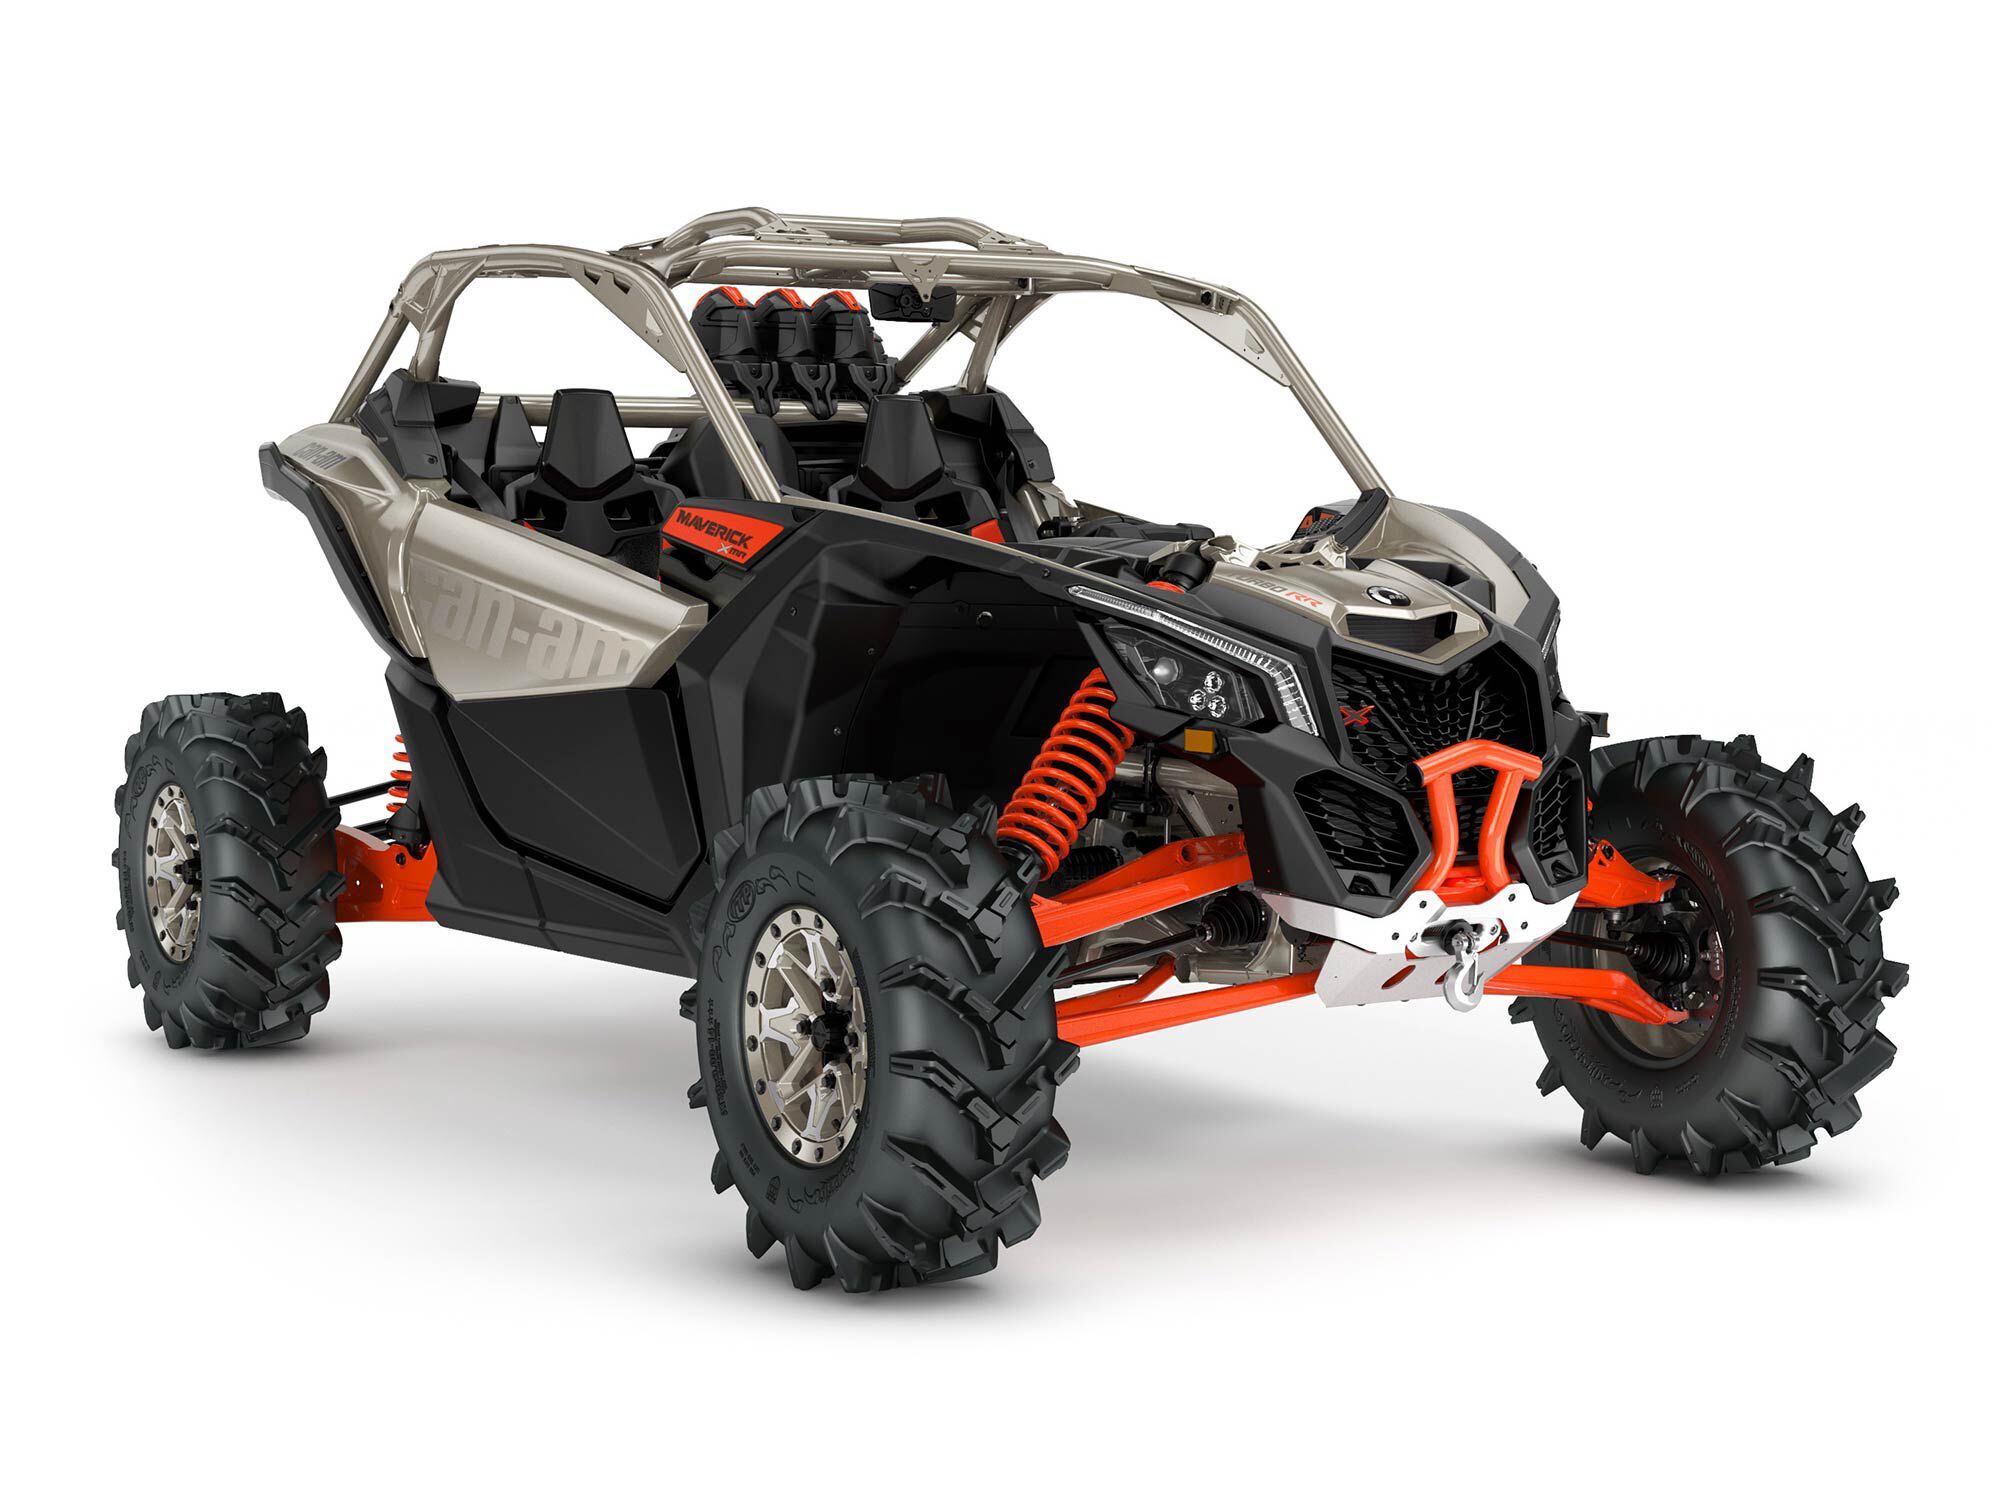 2022 Can-Am Maverick X3 X MR Turbo RR 72 front view in Liquid Titanium and Magma Red.